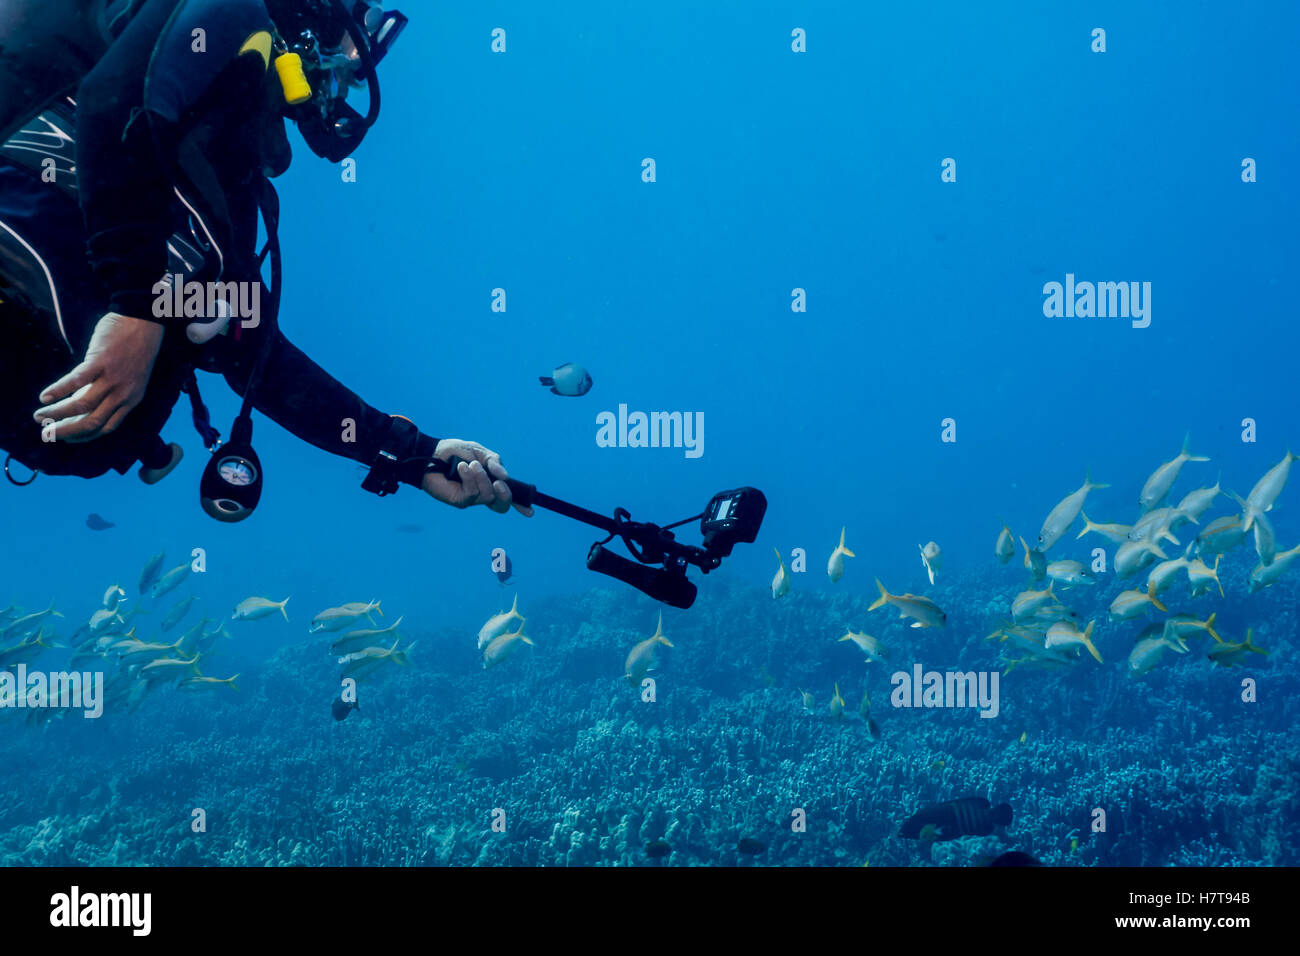 A Male Scuba Diver Wearing A Wetsuit From Big Island Divers Is Using A Selfie Stick With His Underwater Camera To Get Closer To A School Of A Yello... Stock Photo